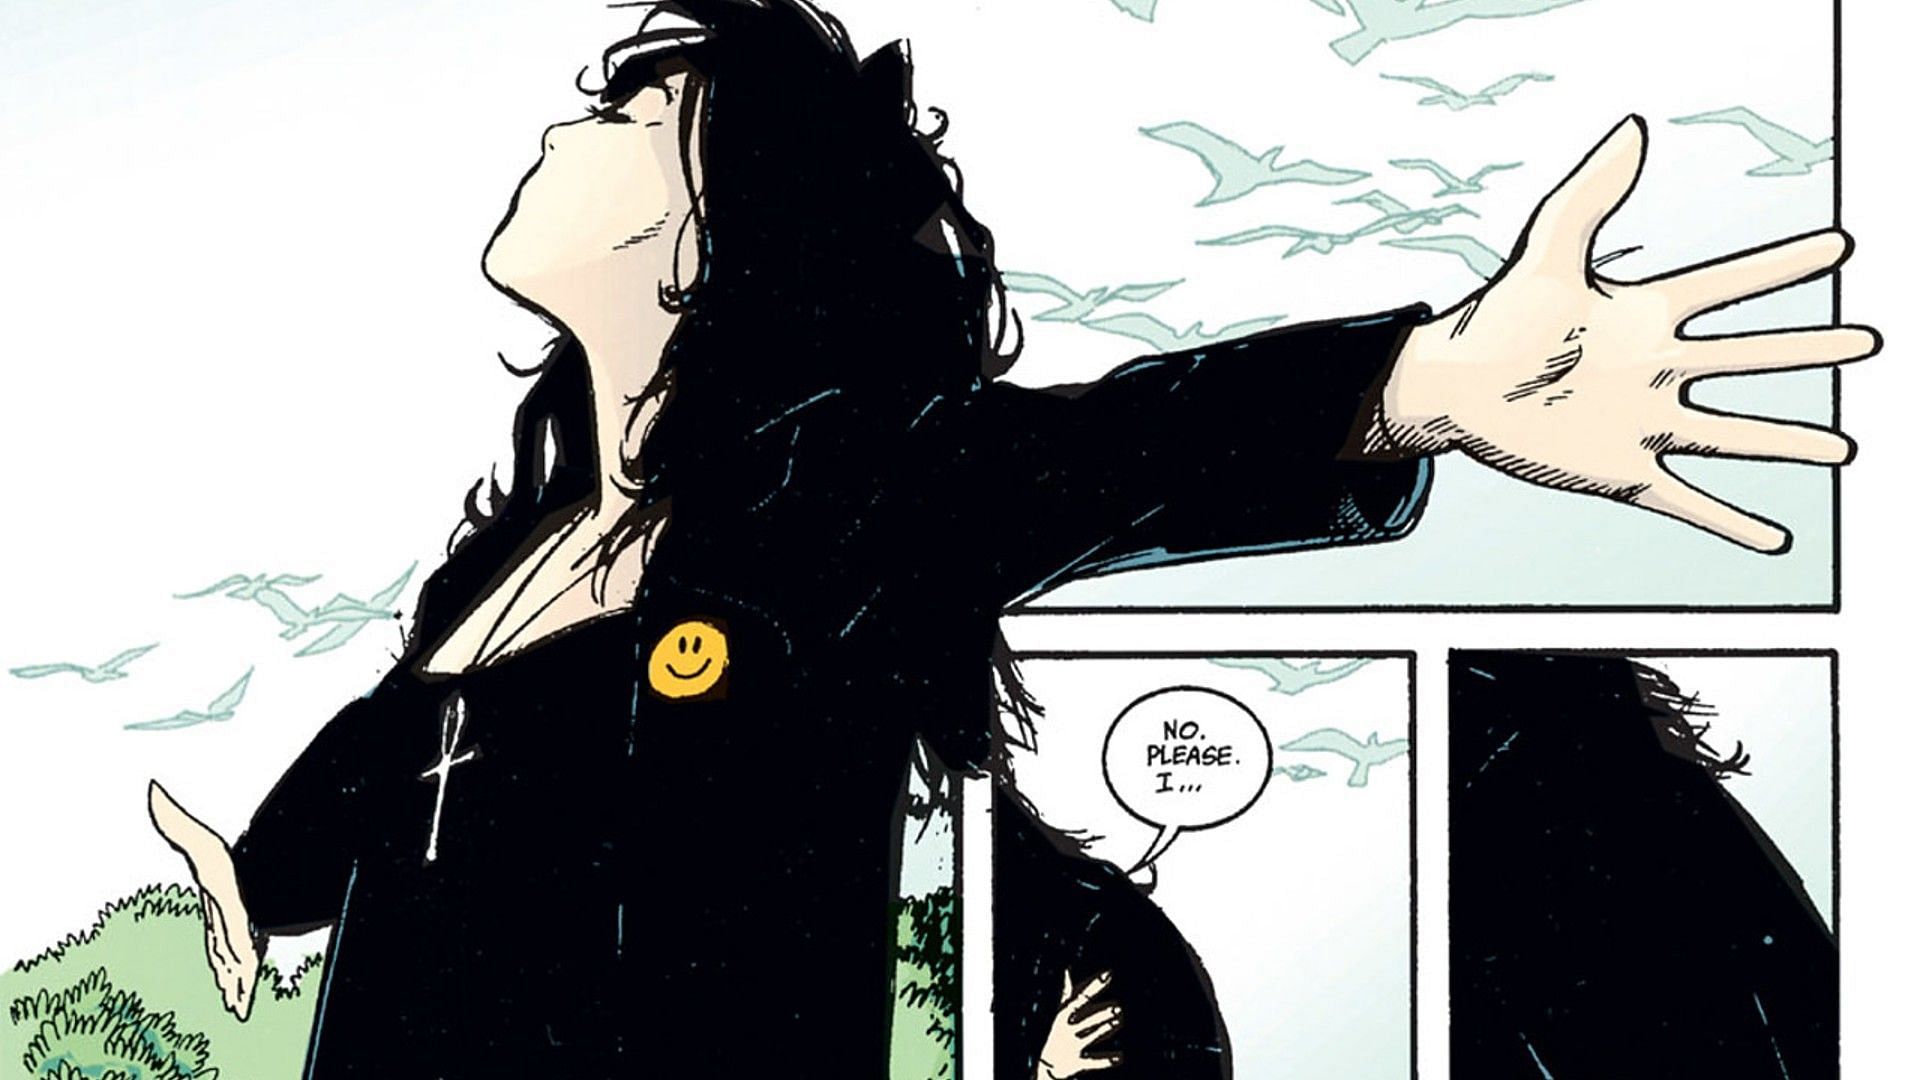 &#039;The High Cost of Living&#039; follows Death assuming the human form of a girl named DiDi (Image via DC Comics)